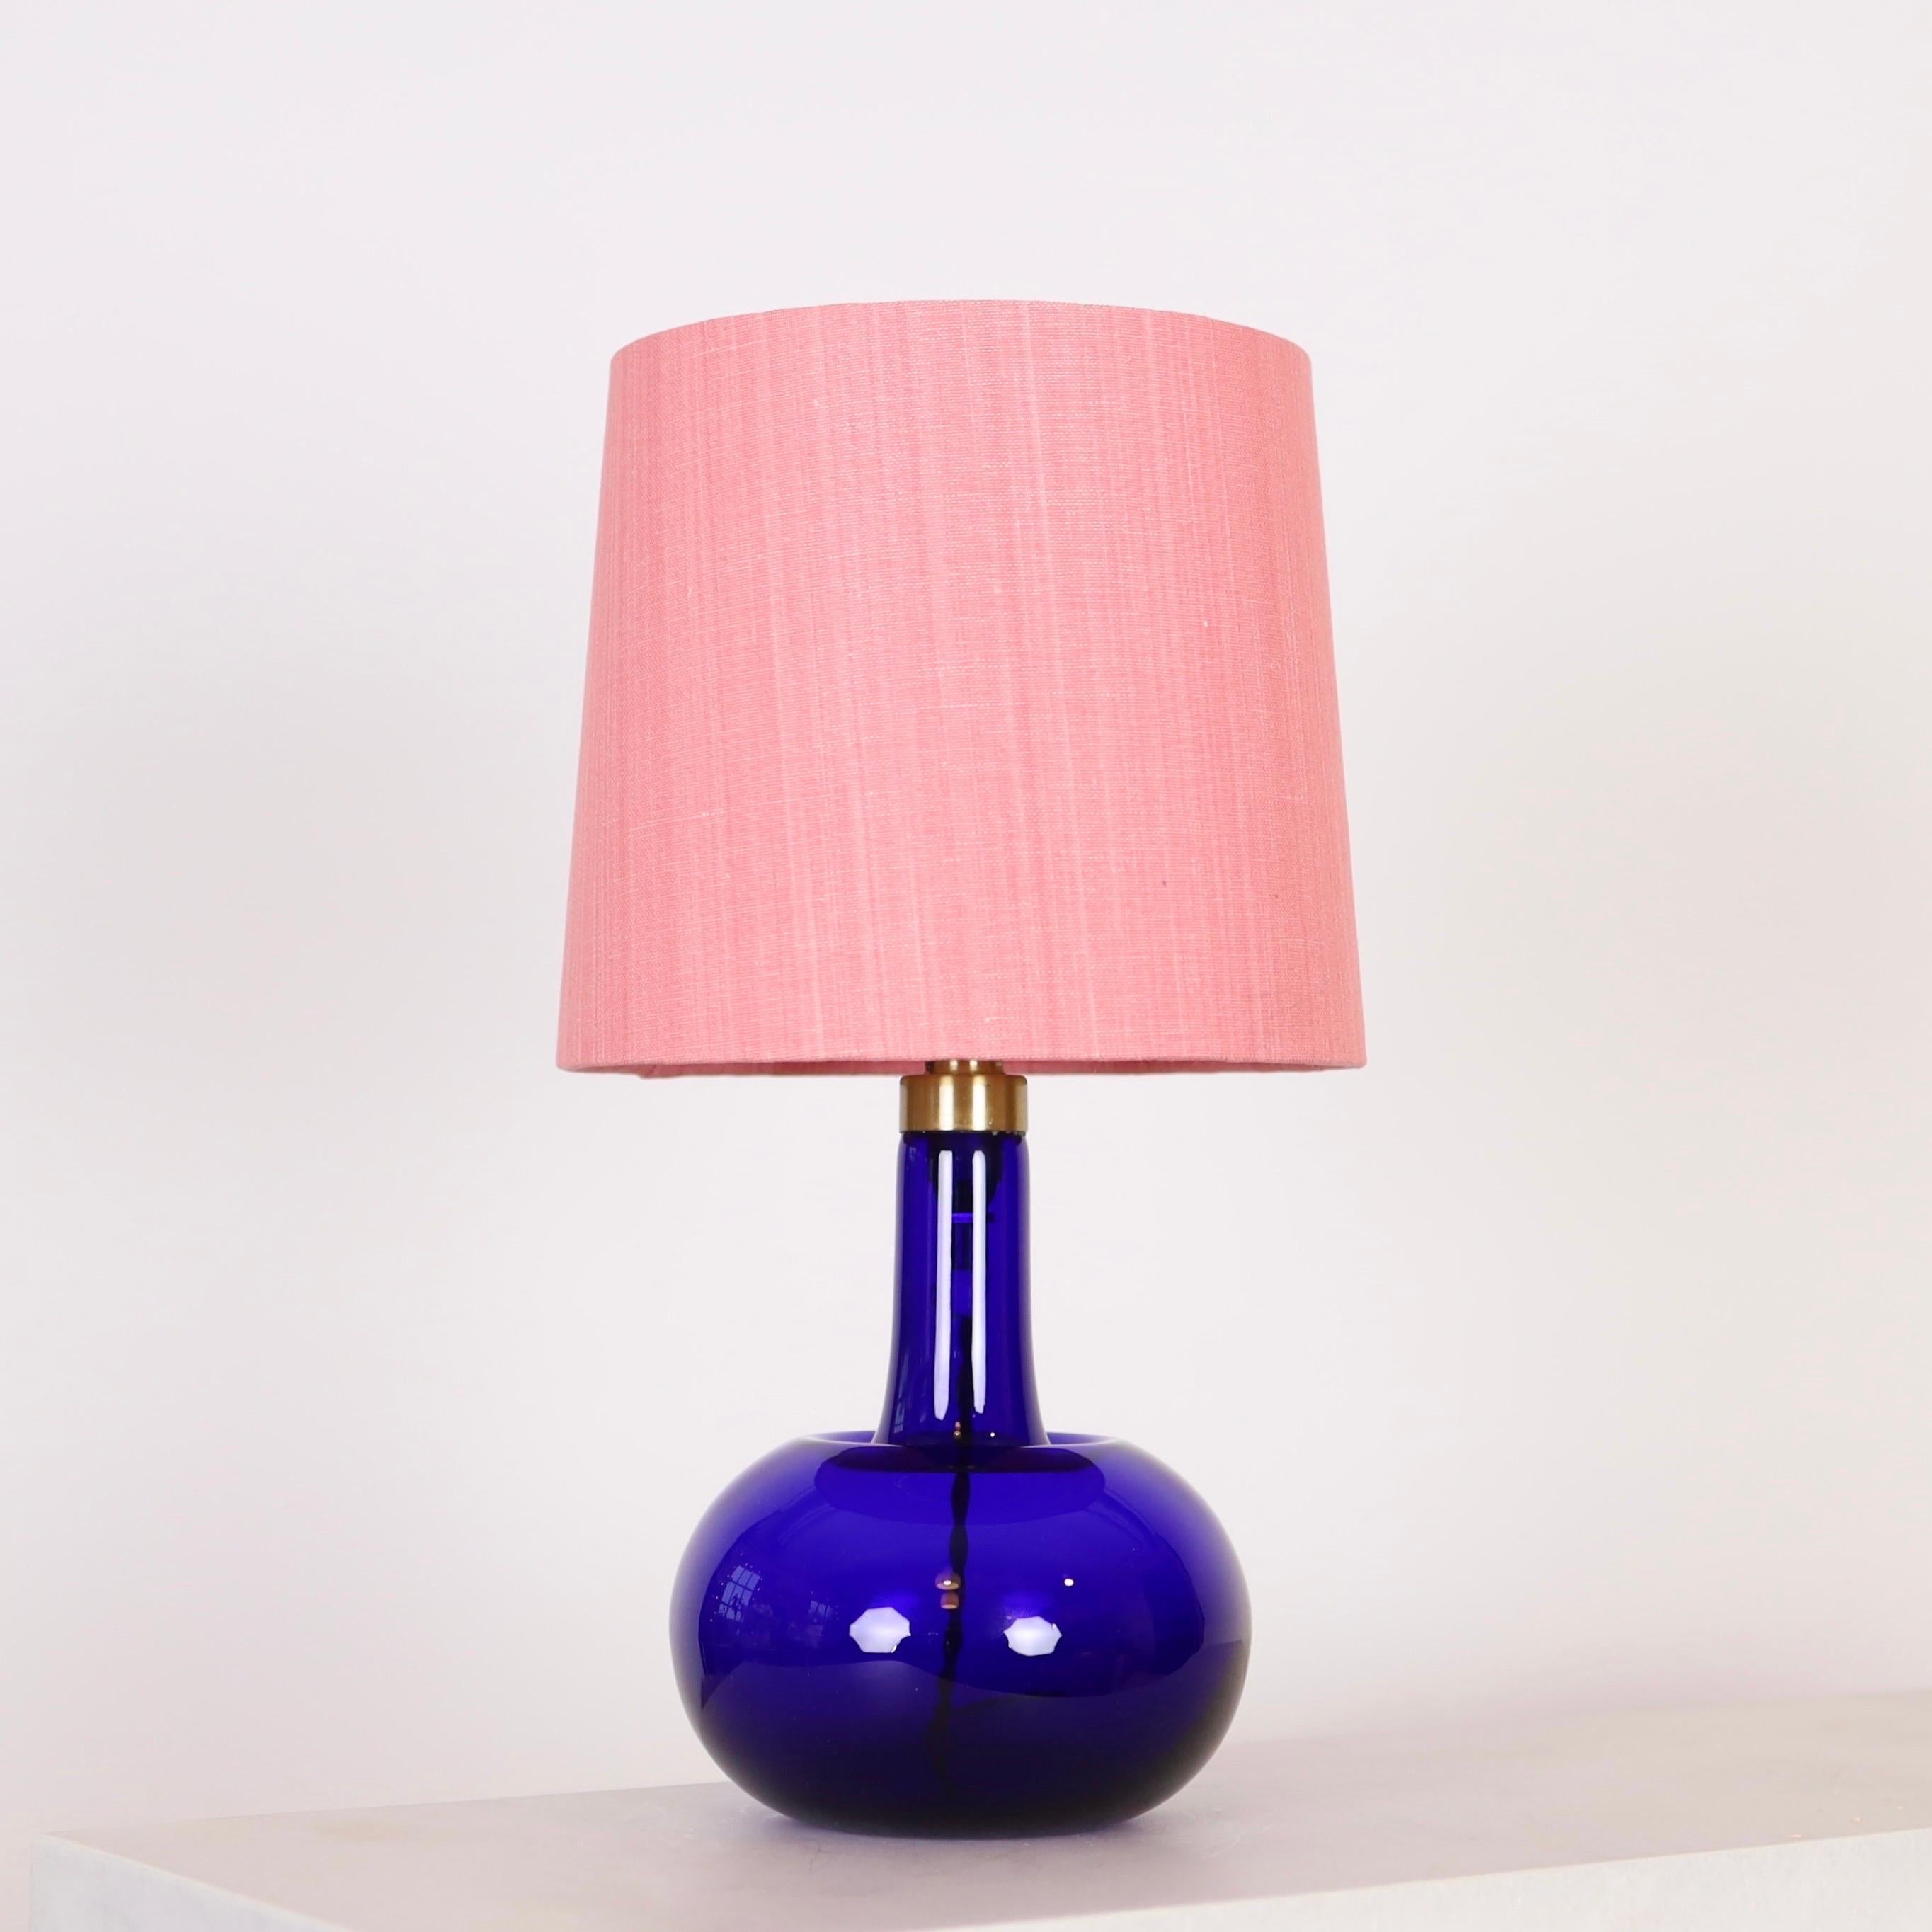 Late 20th Century A blue Glass Desk Lamp by Michael Bang for Holmegaard, 1970s, Denmark For Sale